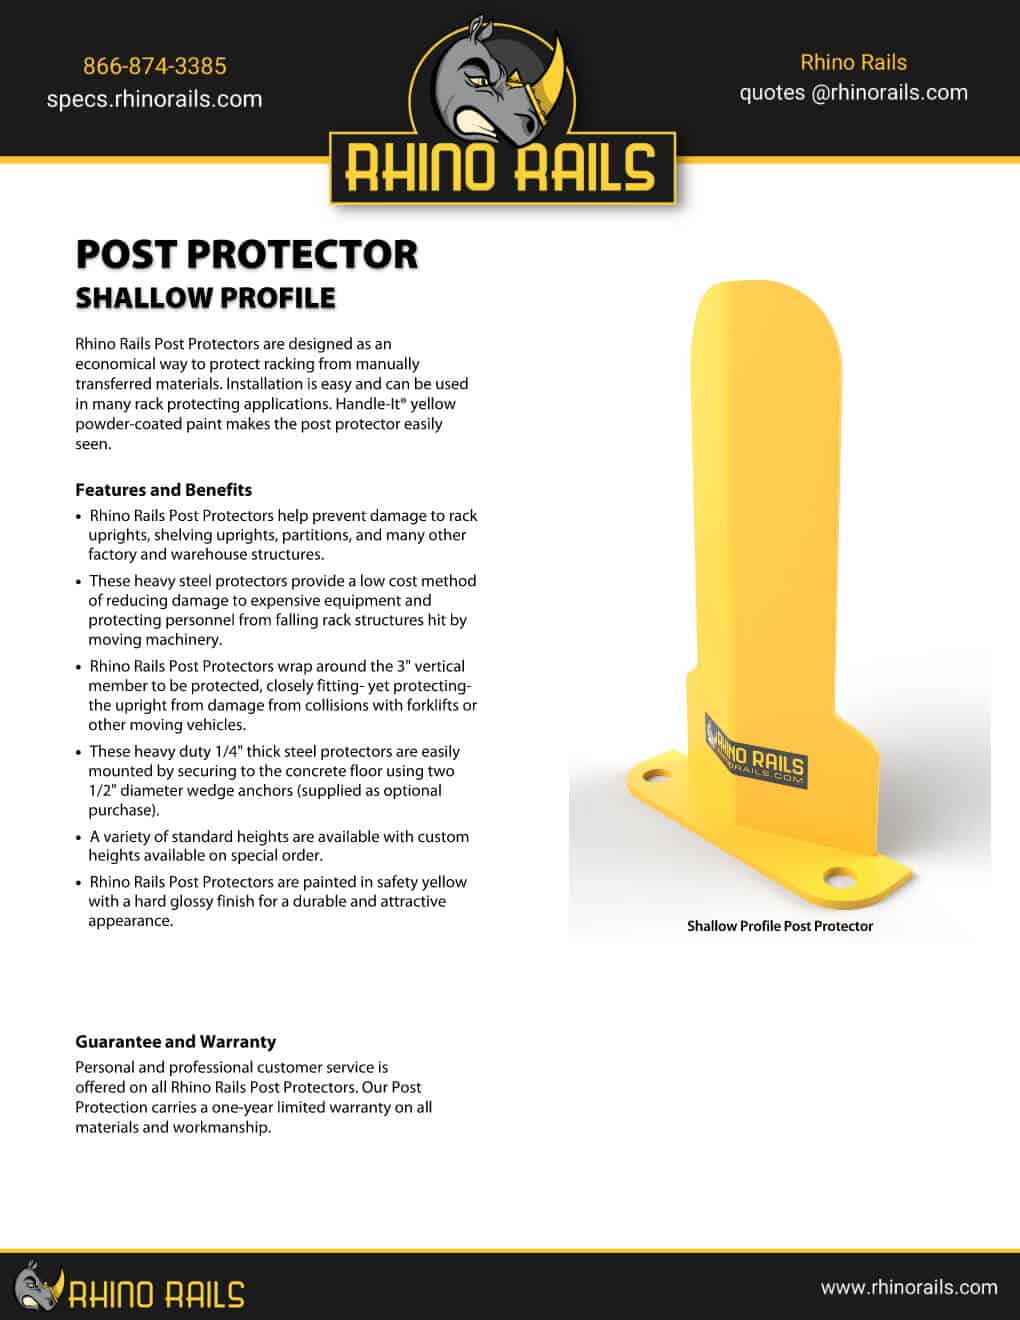 Shallow Profile Post Protector - Product Information Sheet - Photo 1